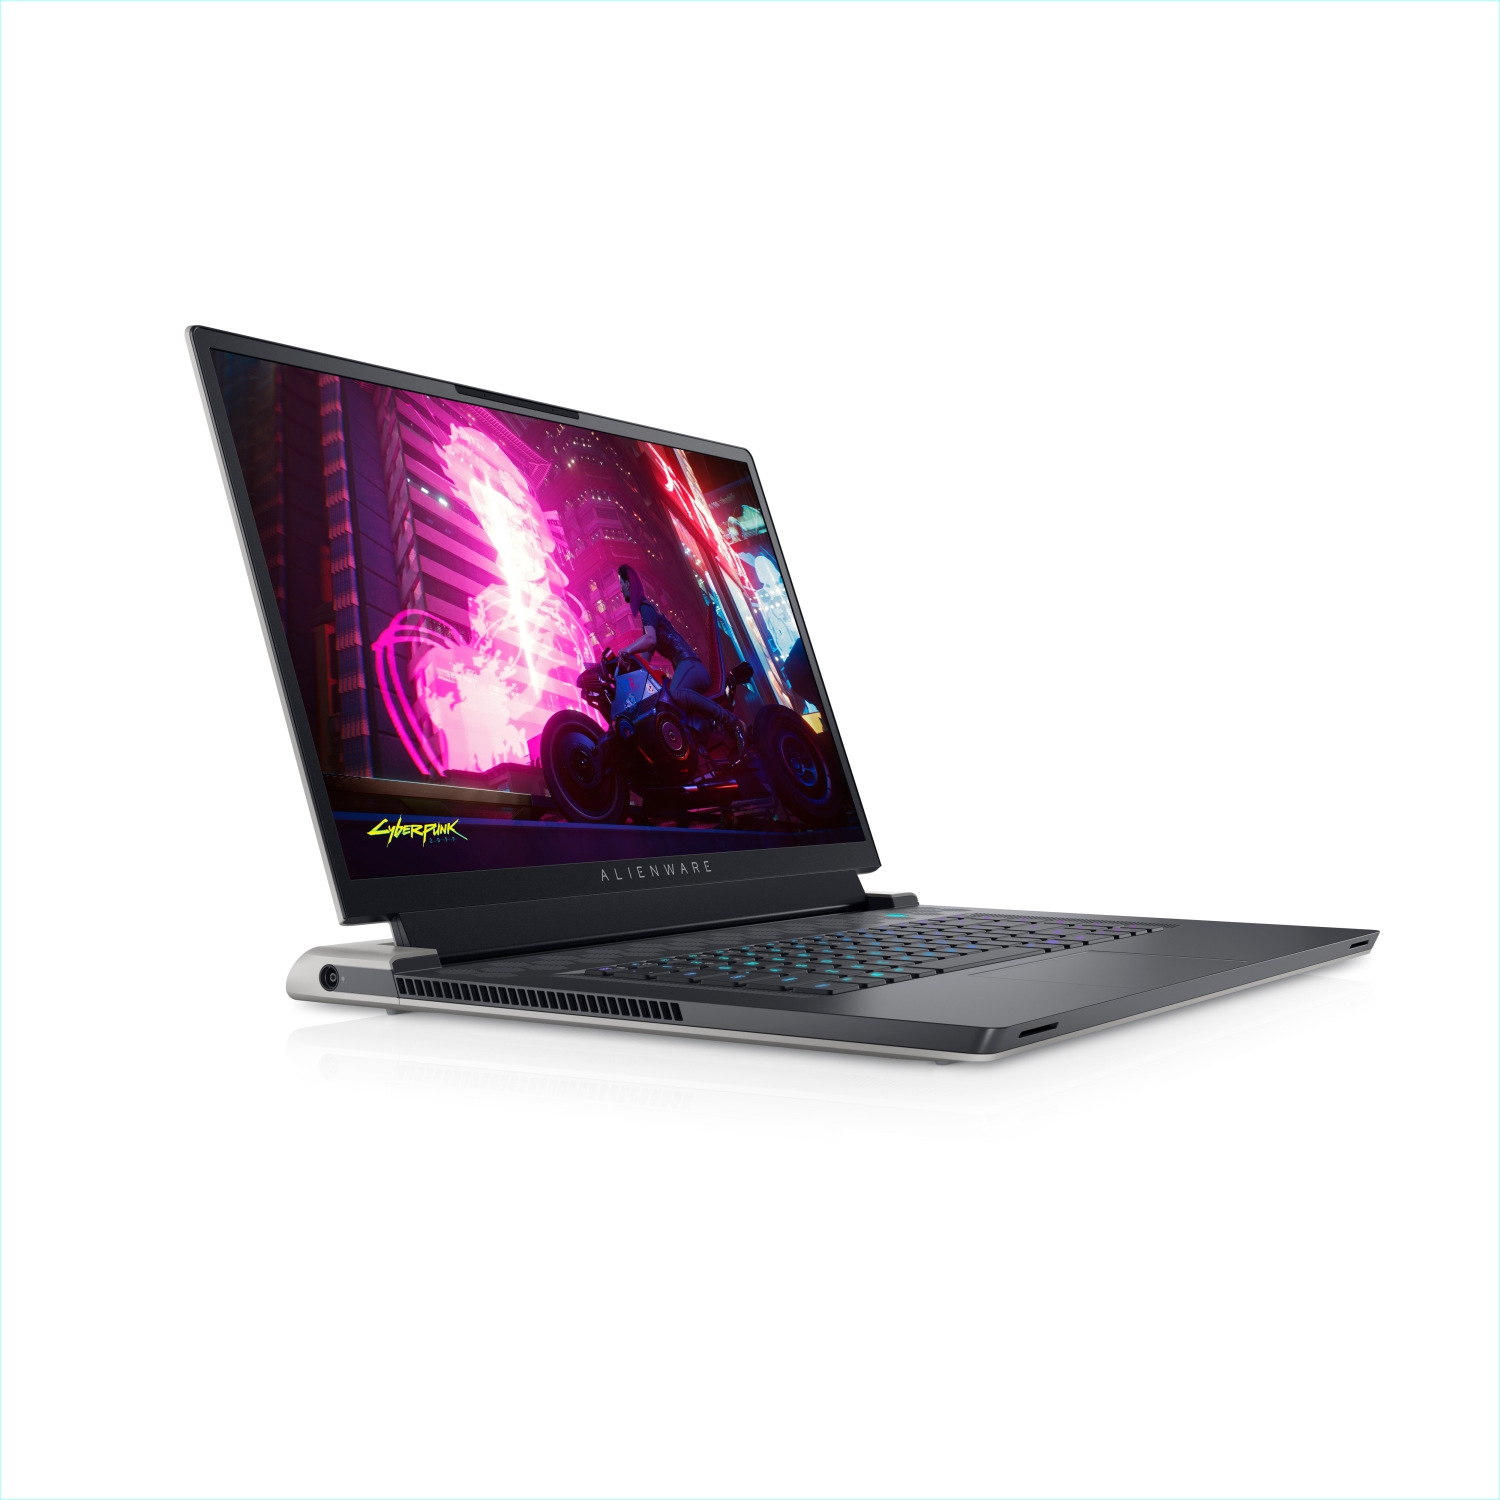 Refurbished (Excellent) - Dell Alienware X17 R1 Gaming Laptop (2021), 17.3" 4K, Core i7, 1TB SSD, 64GB RAM, RTX 3070, 8 Cores @ 4.6 GHz, 11th Gen CPU Certified